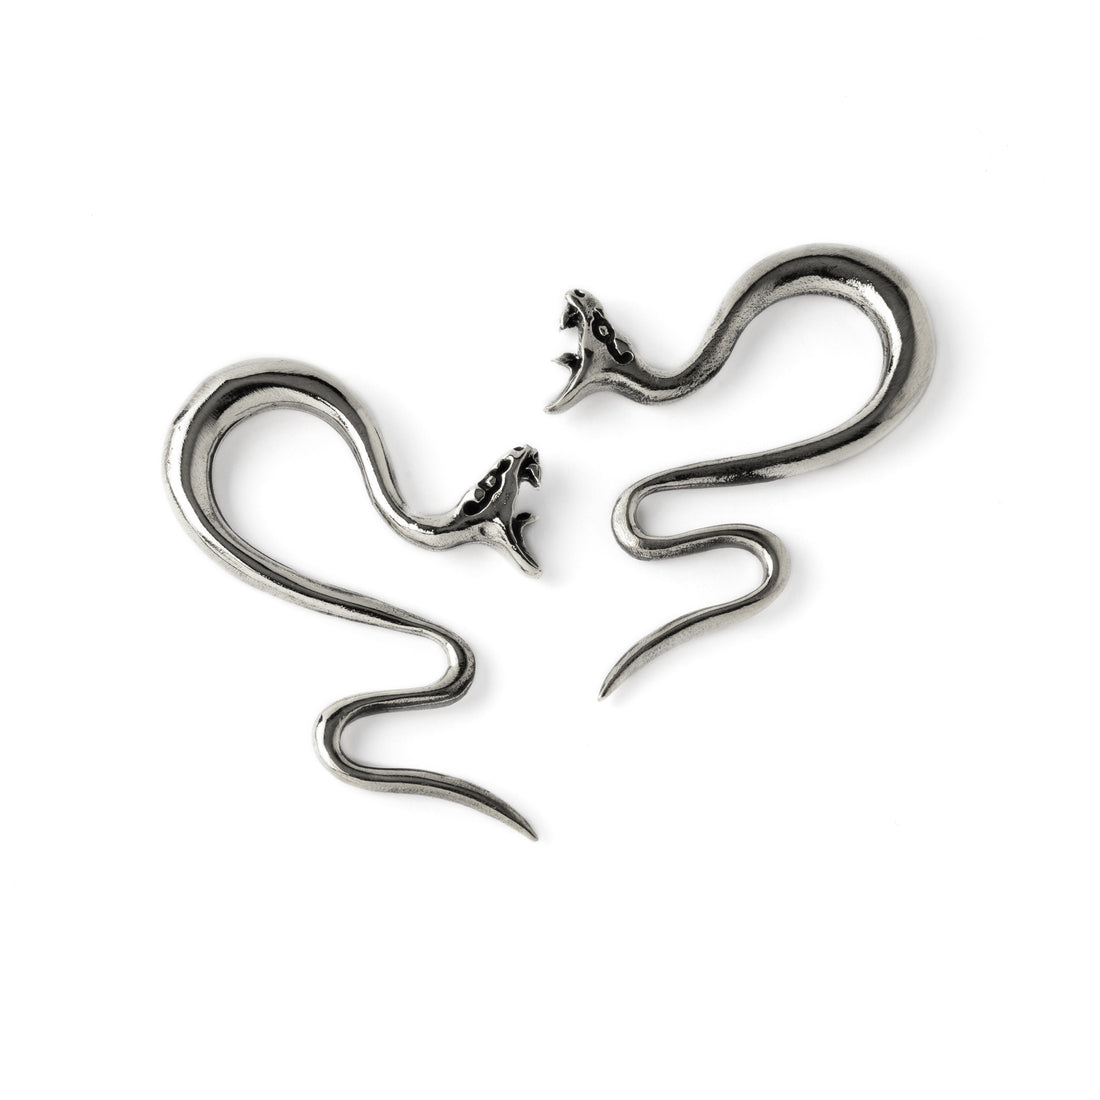 pair of serpent ear hangers for stretched ears size 4g, 2g, 0g frontal view